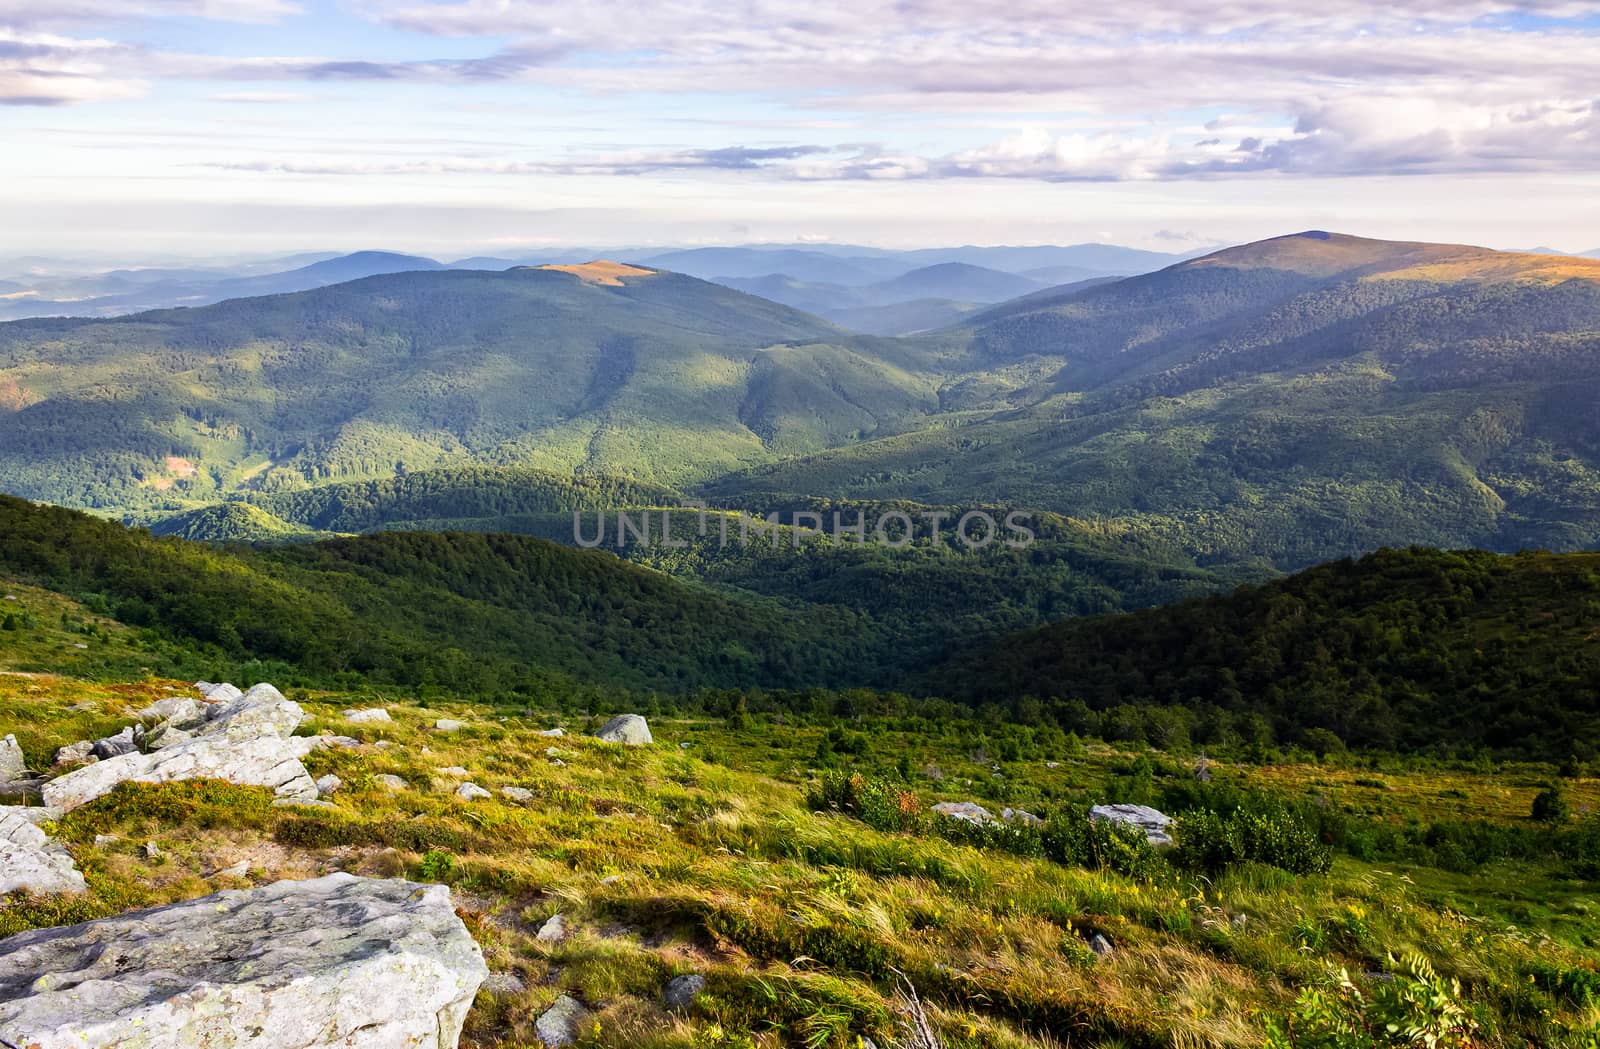 rocky formations on the grassy hills. beautiful mountainous scenery in late summer. colorful grassy carpet on the hillside. forested mountains in the distance in dappled light under cloudy sky